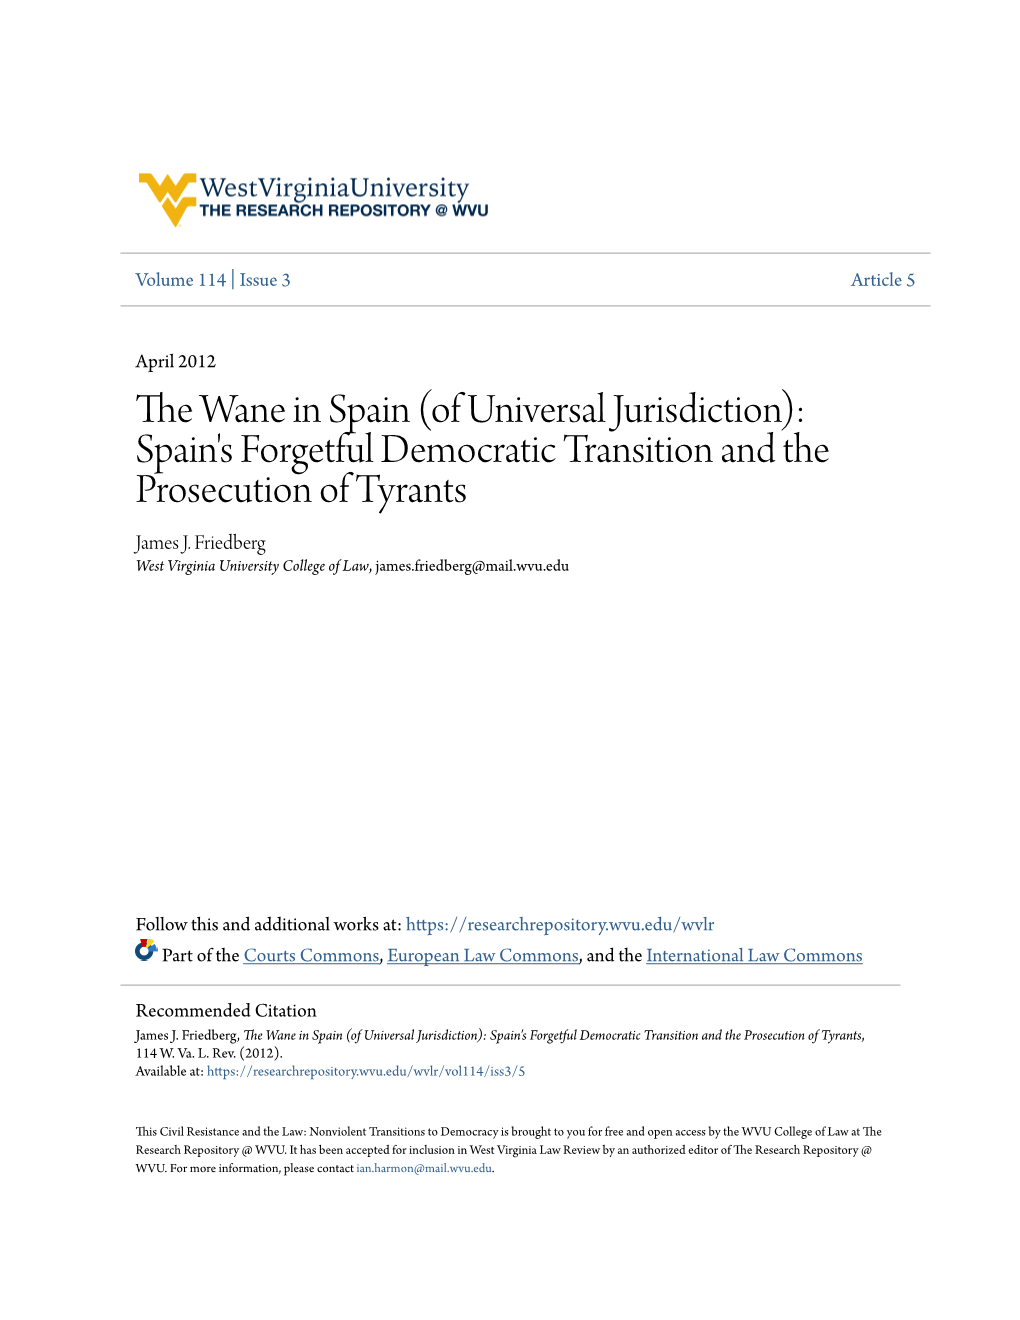 Of Universal Jurisdiction): Spain's Forgetful Democratic Transition and the Prosecution of Tyrants James J